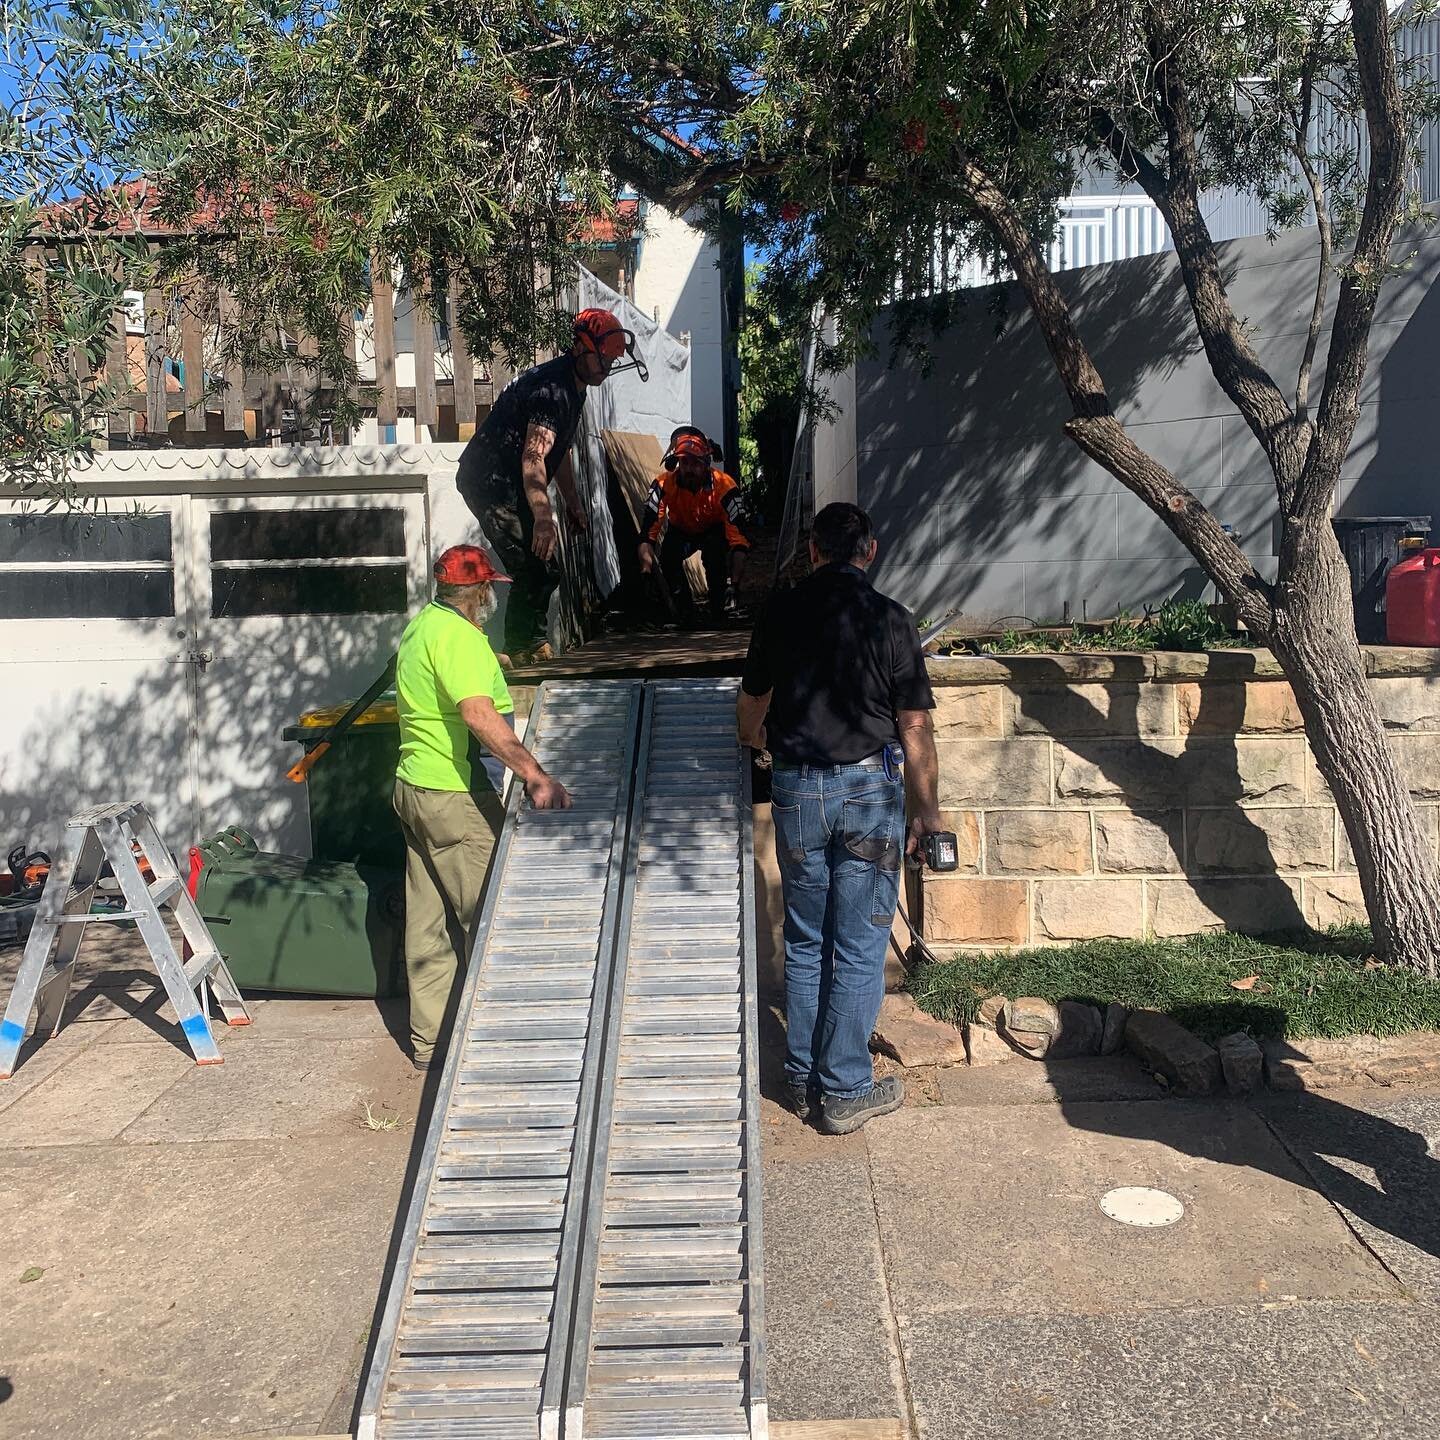 The boys are hard at work over at Randwick today! Thanks @slimdiggings for your awesome work! #poolbuilder #excavation #pooldesign #sydneypoolbuilder #tightaccessexcavation